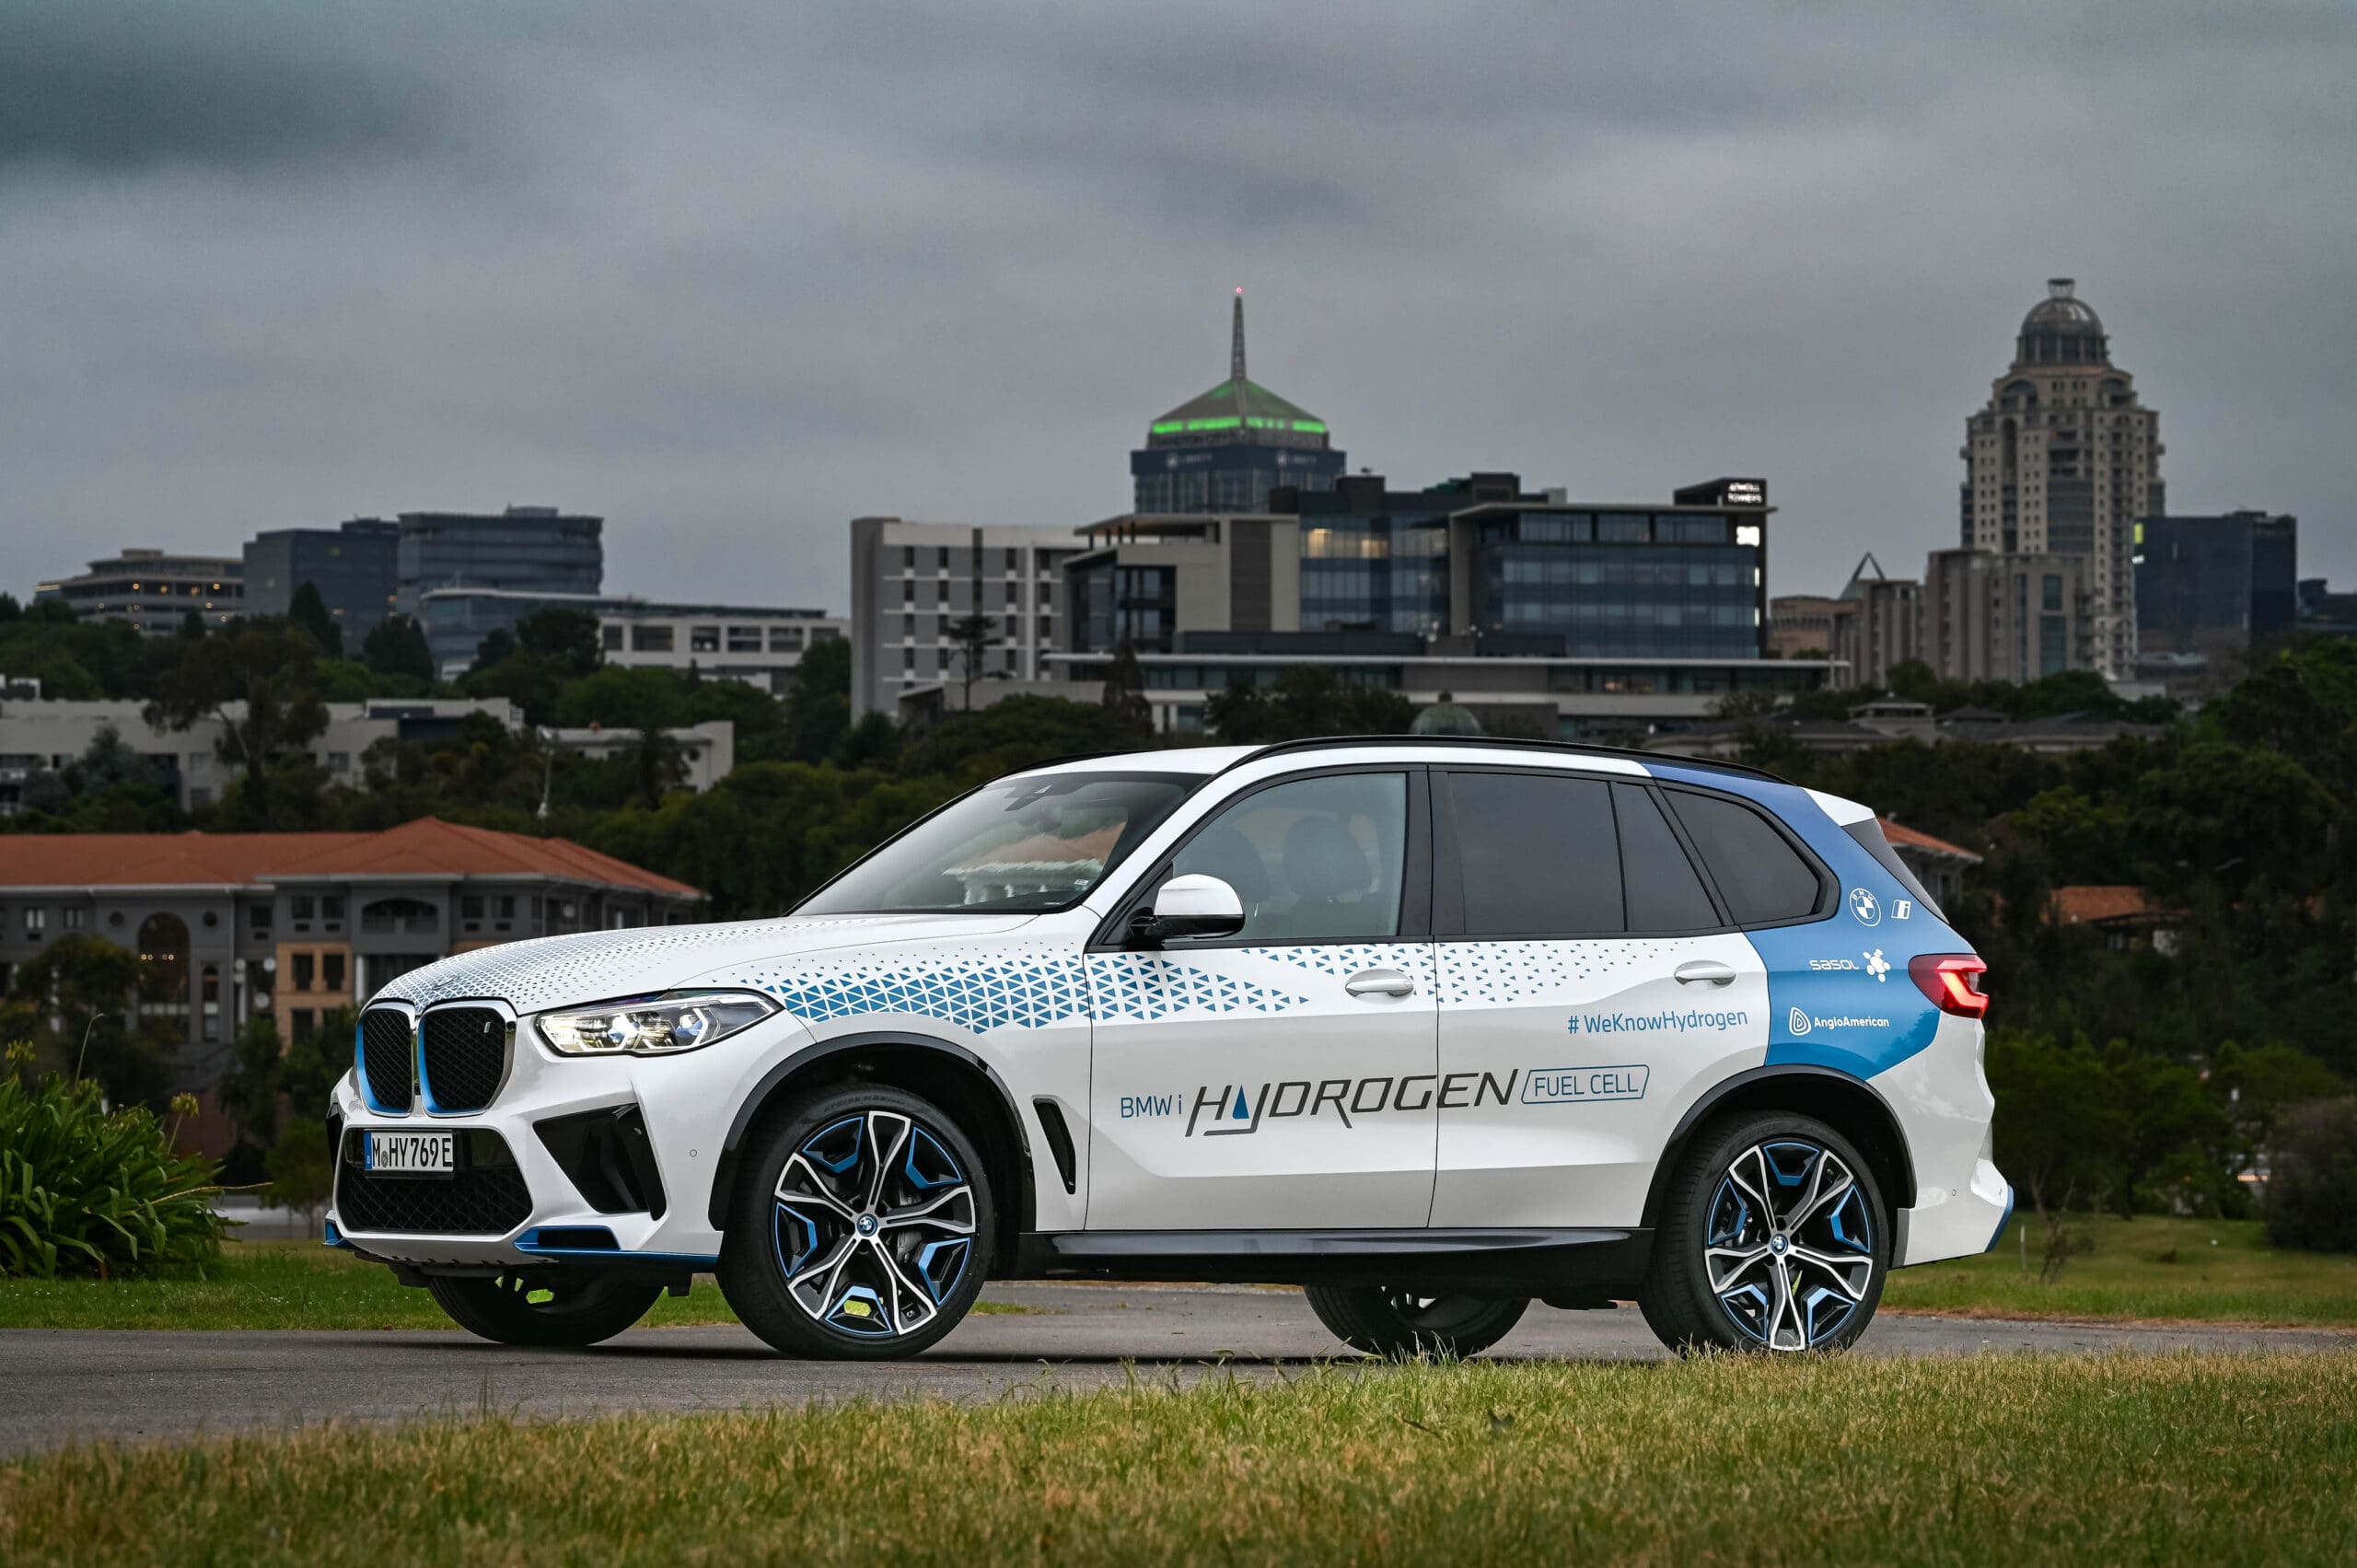 Anglo American Platinum, BMW Group South Africa and Sasol take next step in collaboration with pilot fleet of BMW iX5 Hydrogen fuel cell electric vehicles